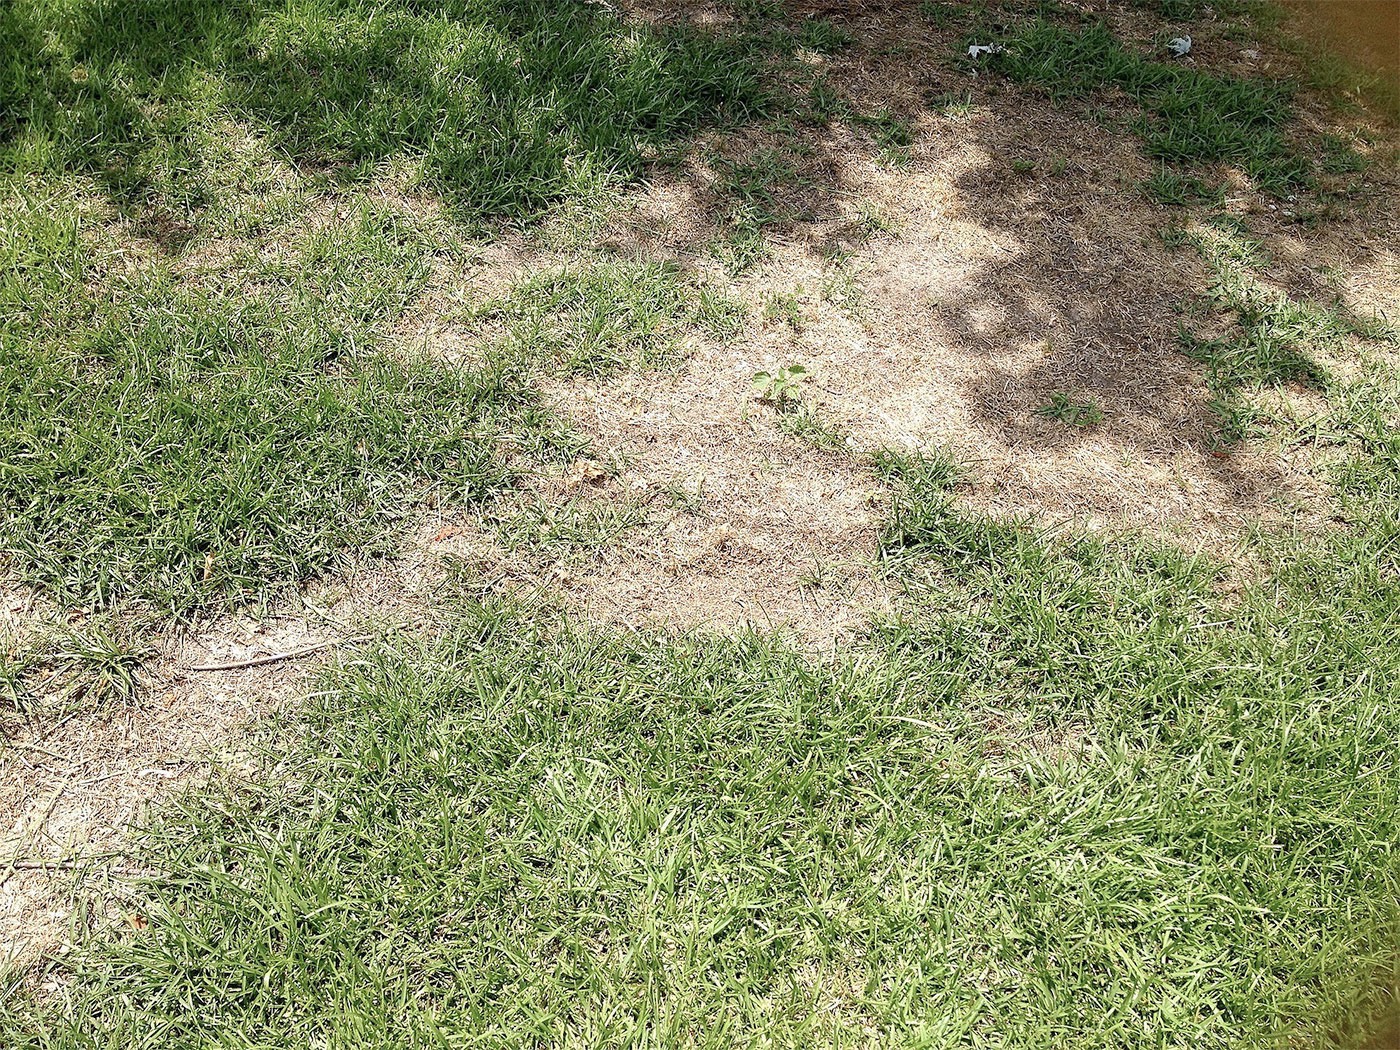 Lawn being treated to optimize growth before summer